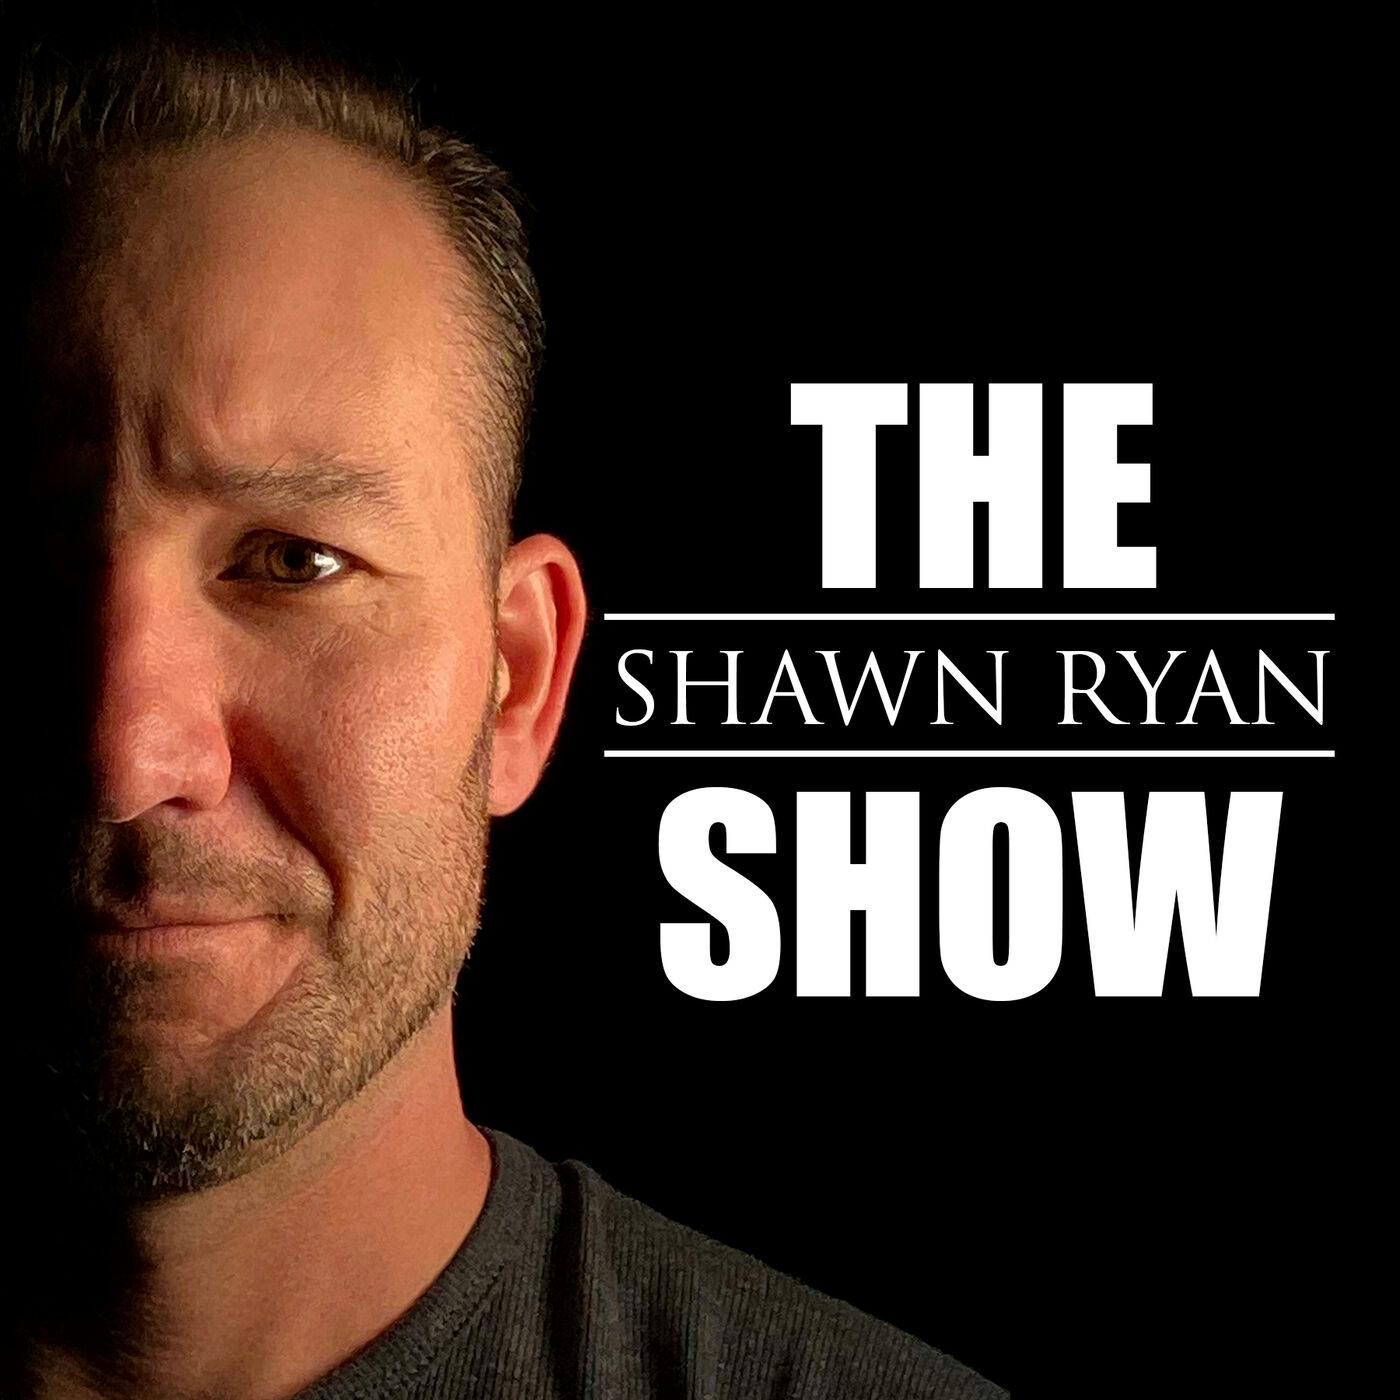 Storytime - Inside the Navy SEALs Team Room by Shawn Ryan | Cumulus Podcast Network